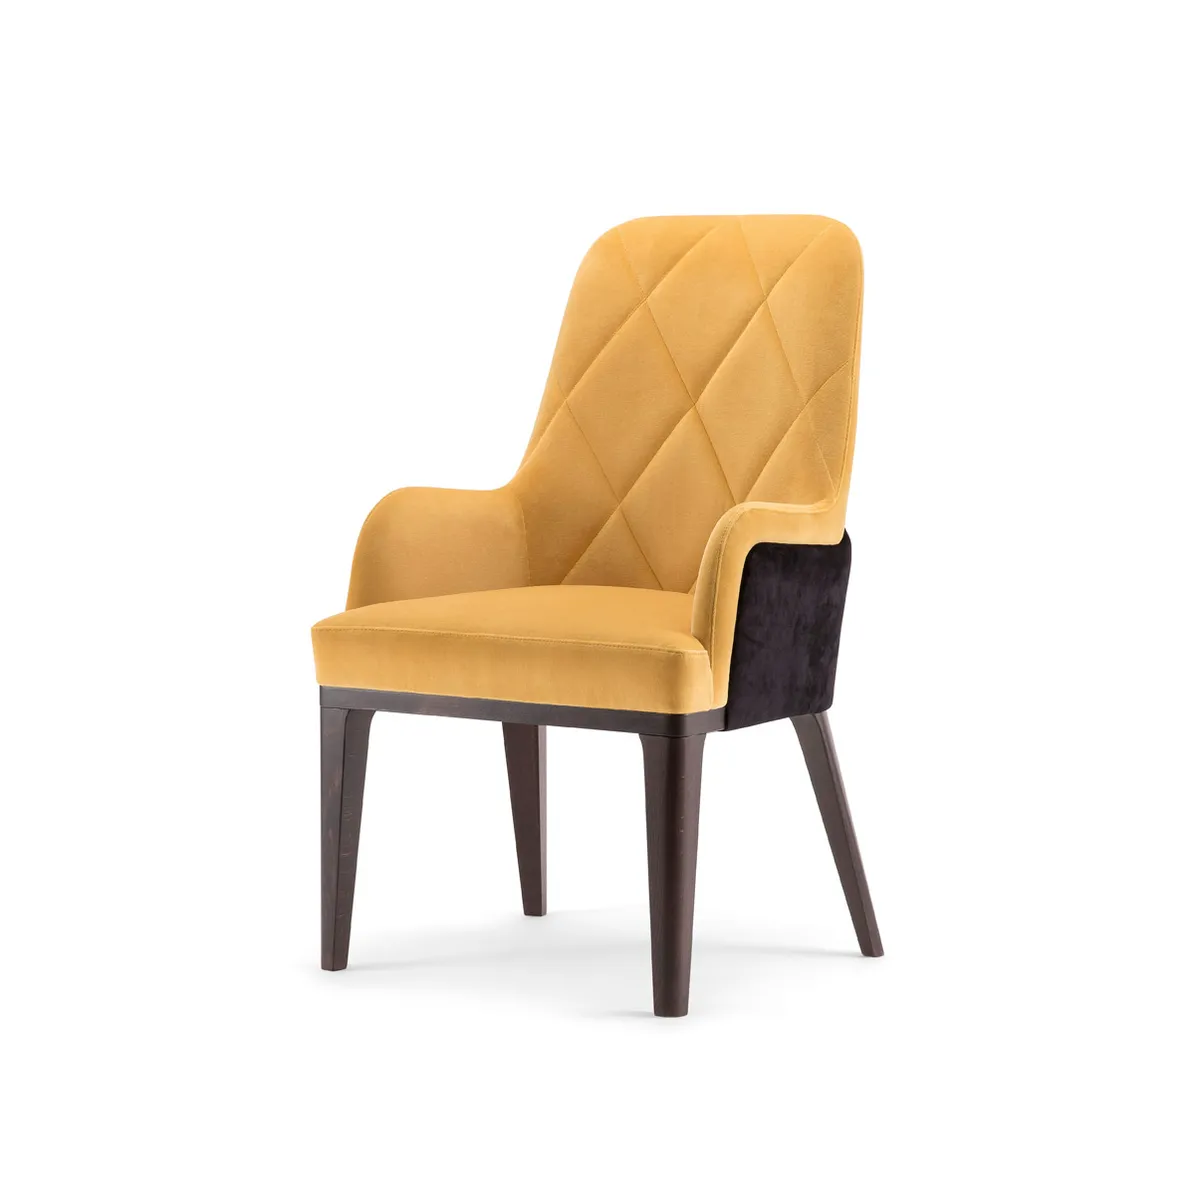 Dodie High Back Chair Bar Hotel Furniture With Yellow Quilted Upholstery Insideoutcontracts 1